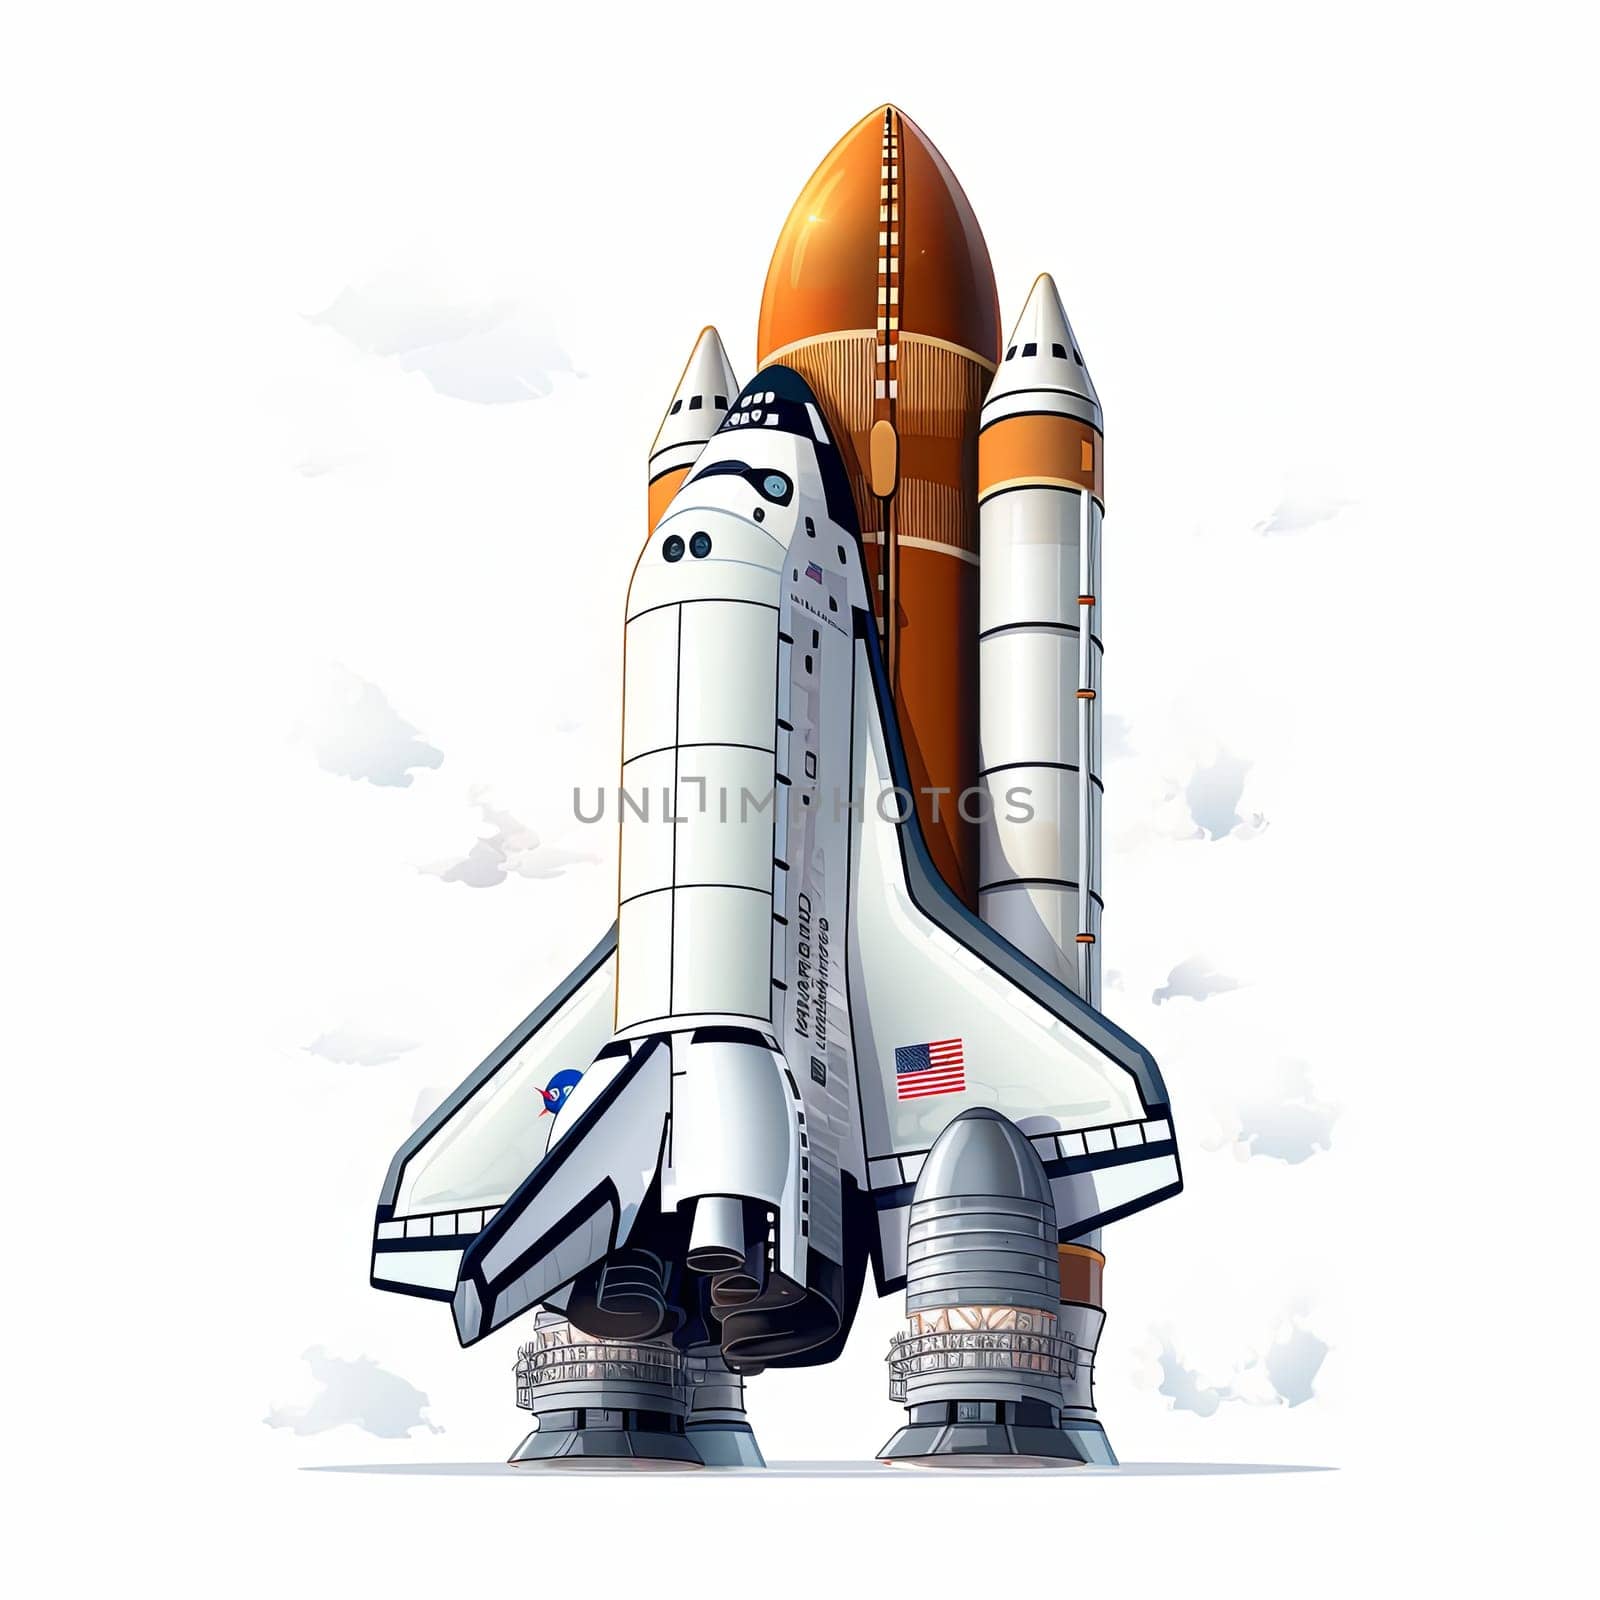 Space Shuttle and Rocket Isolated on White Background. Space Mission Spaceship Getting Ready to Launch.